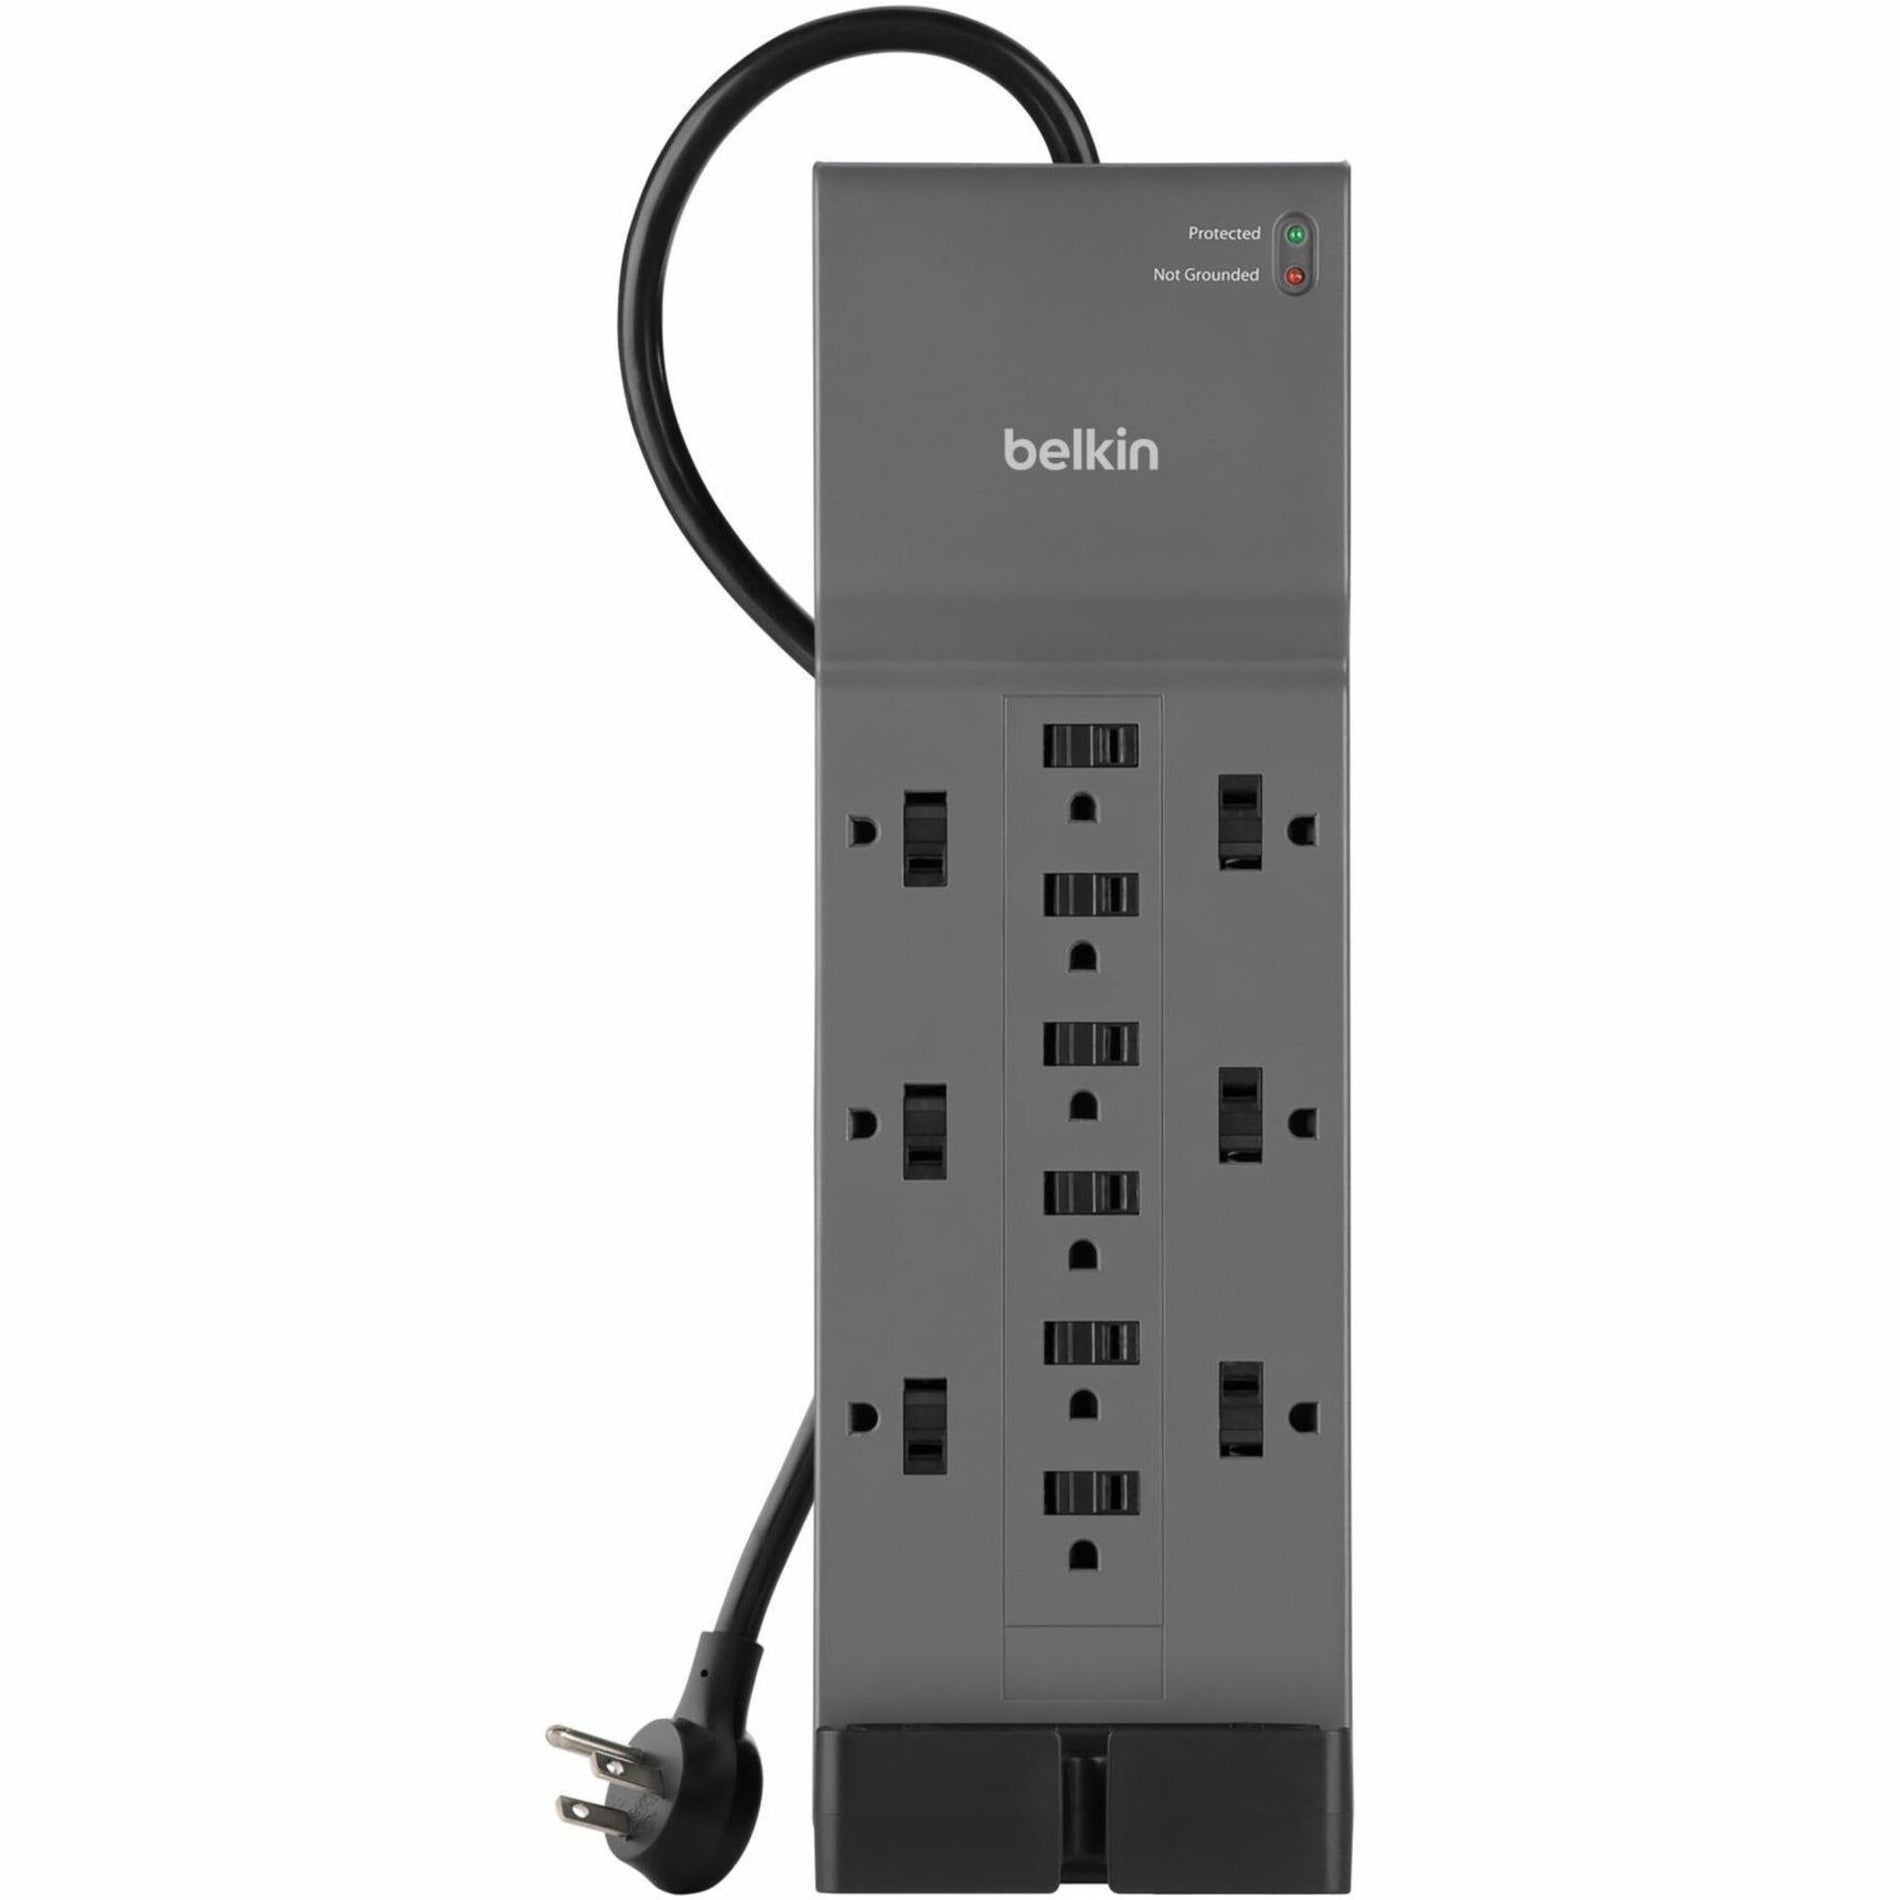 Belkin SRA009P12TT8 Connect 12-Outlet Home/Office Surge Protector with 8-Foot Cord, Protect Your Devices and Enjoy Peace of Mind